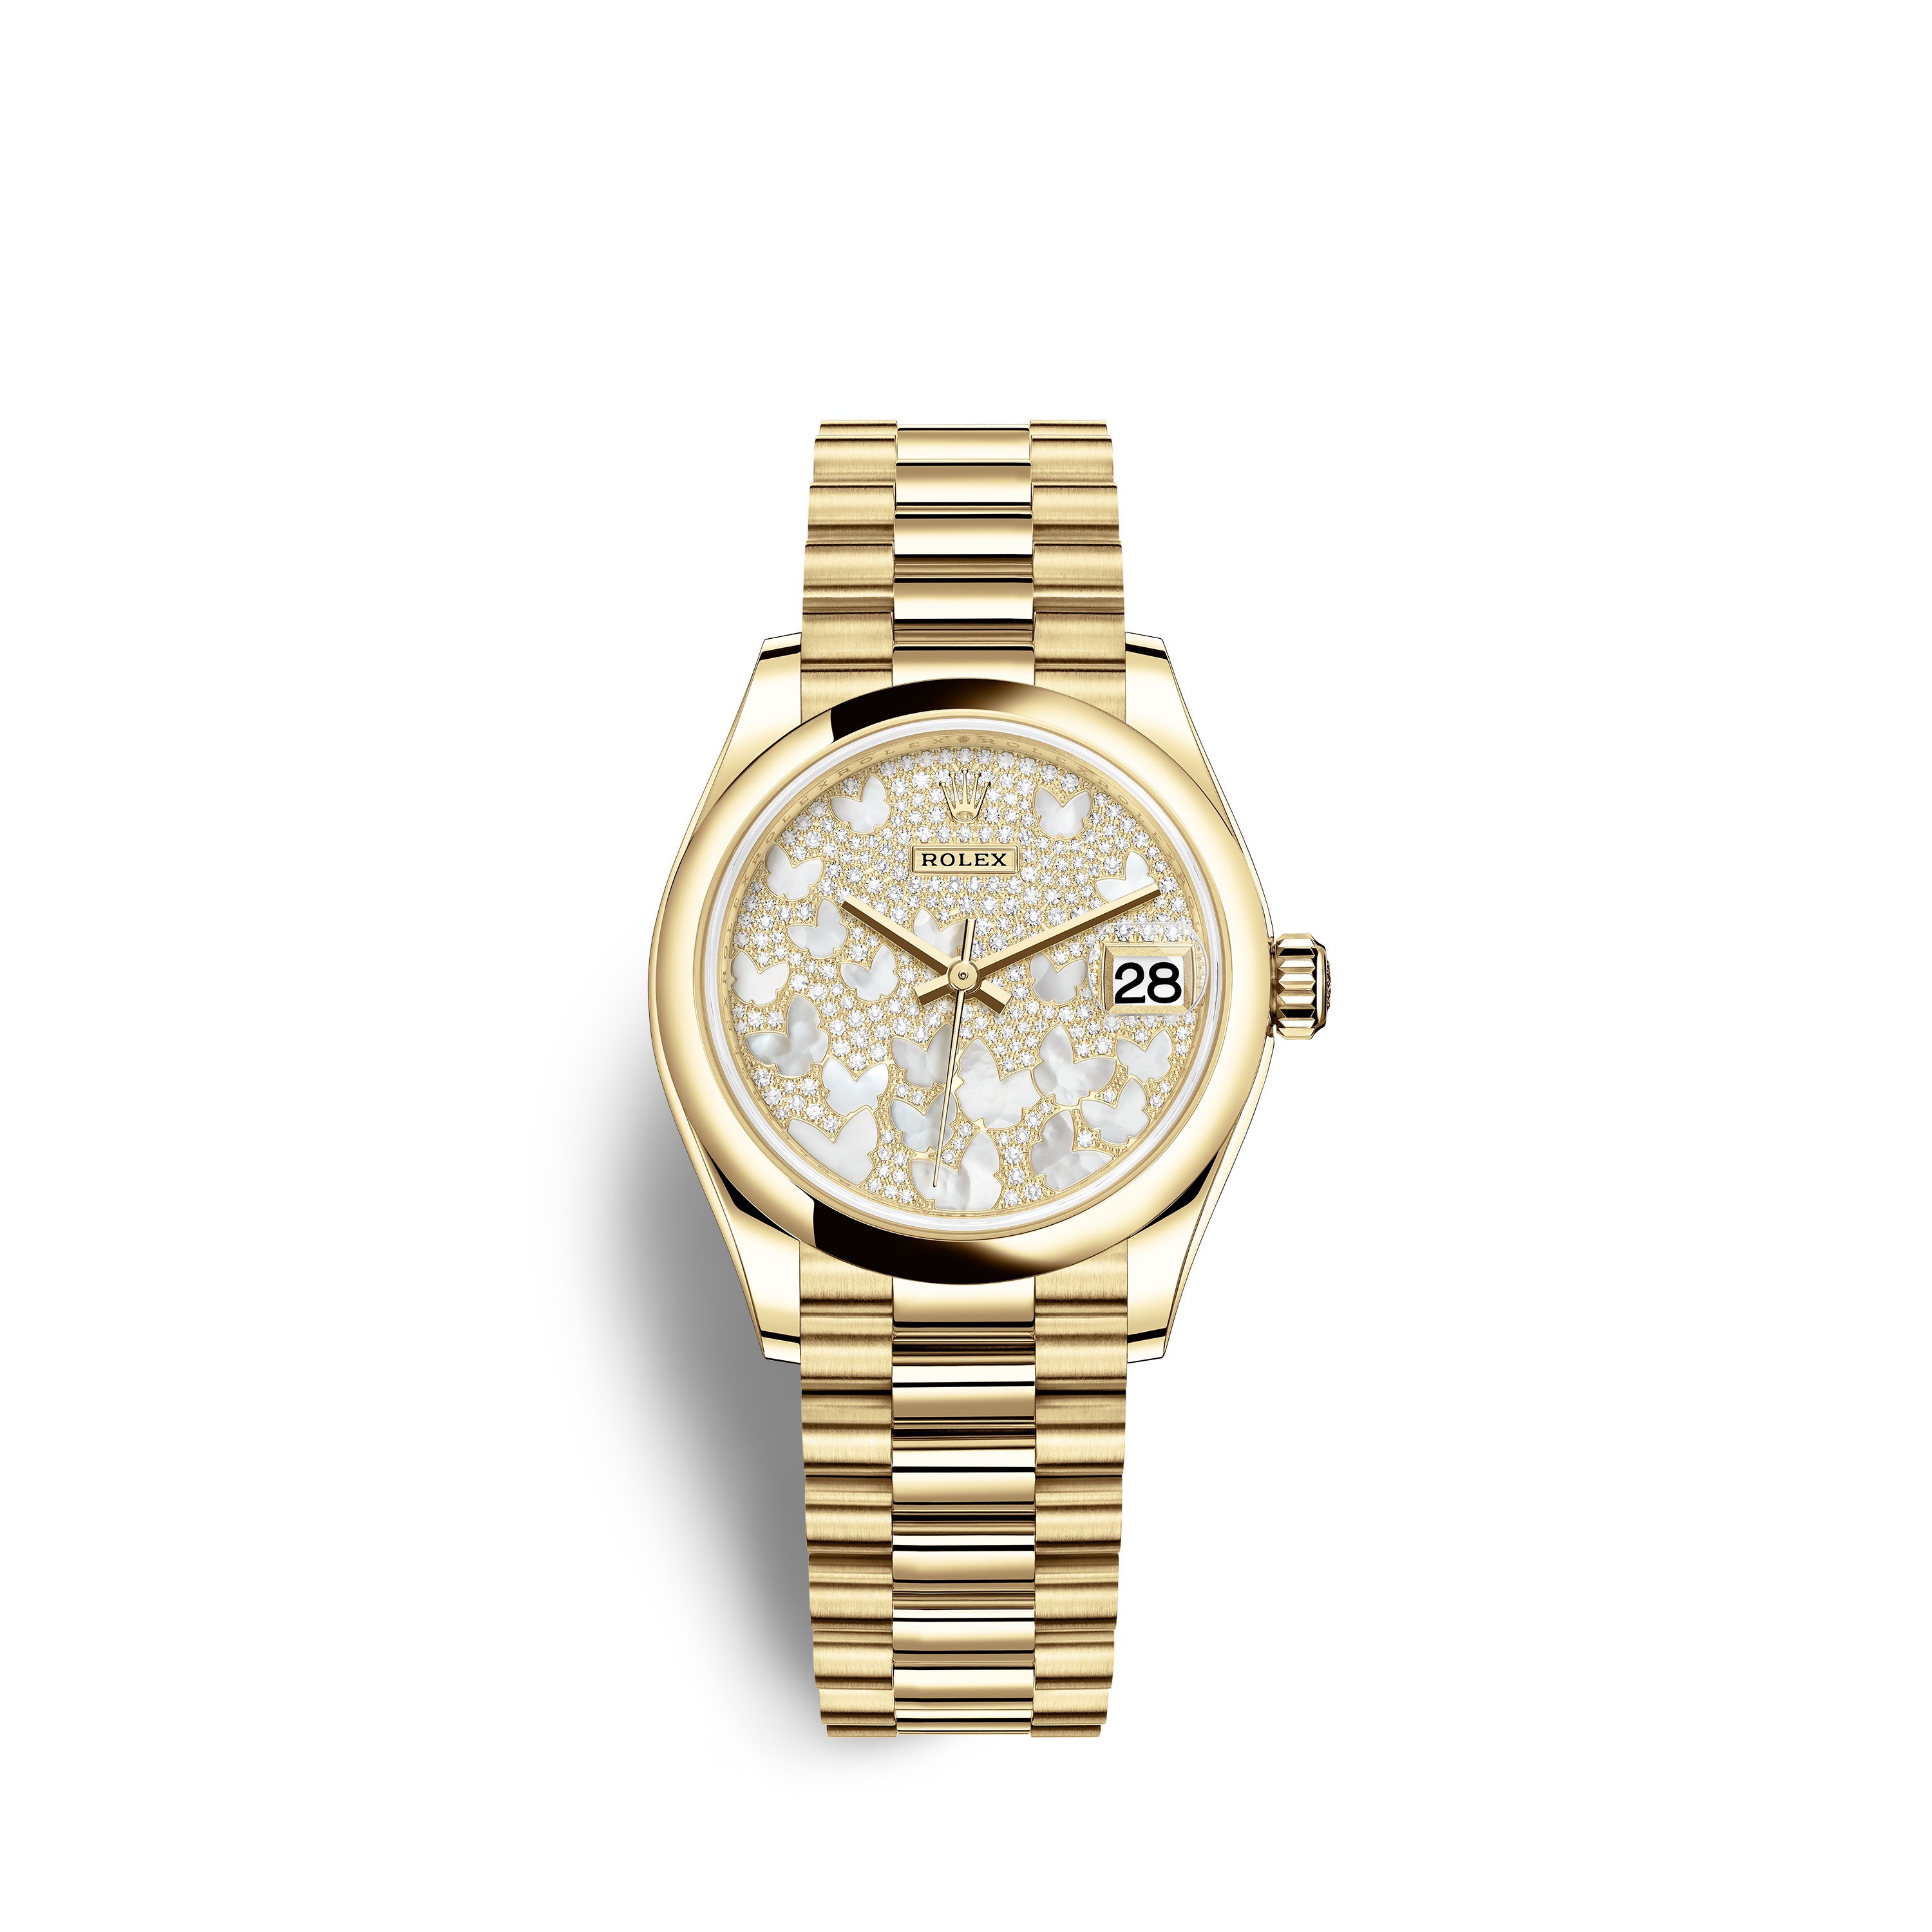 Datejust 31 278248 Gold Watch (Paved, Mother-of-Pearl Butterfly)